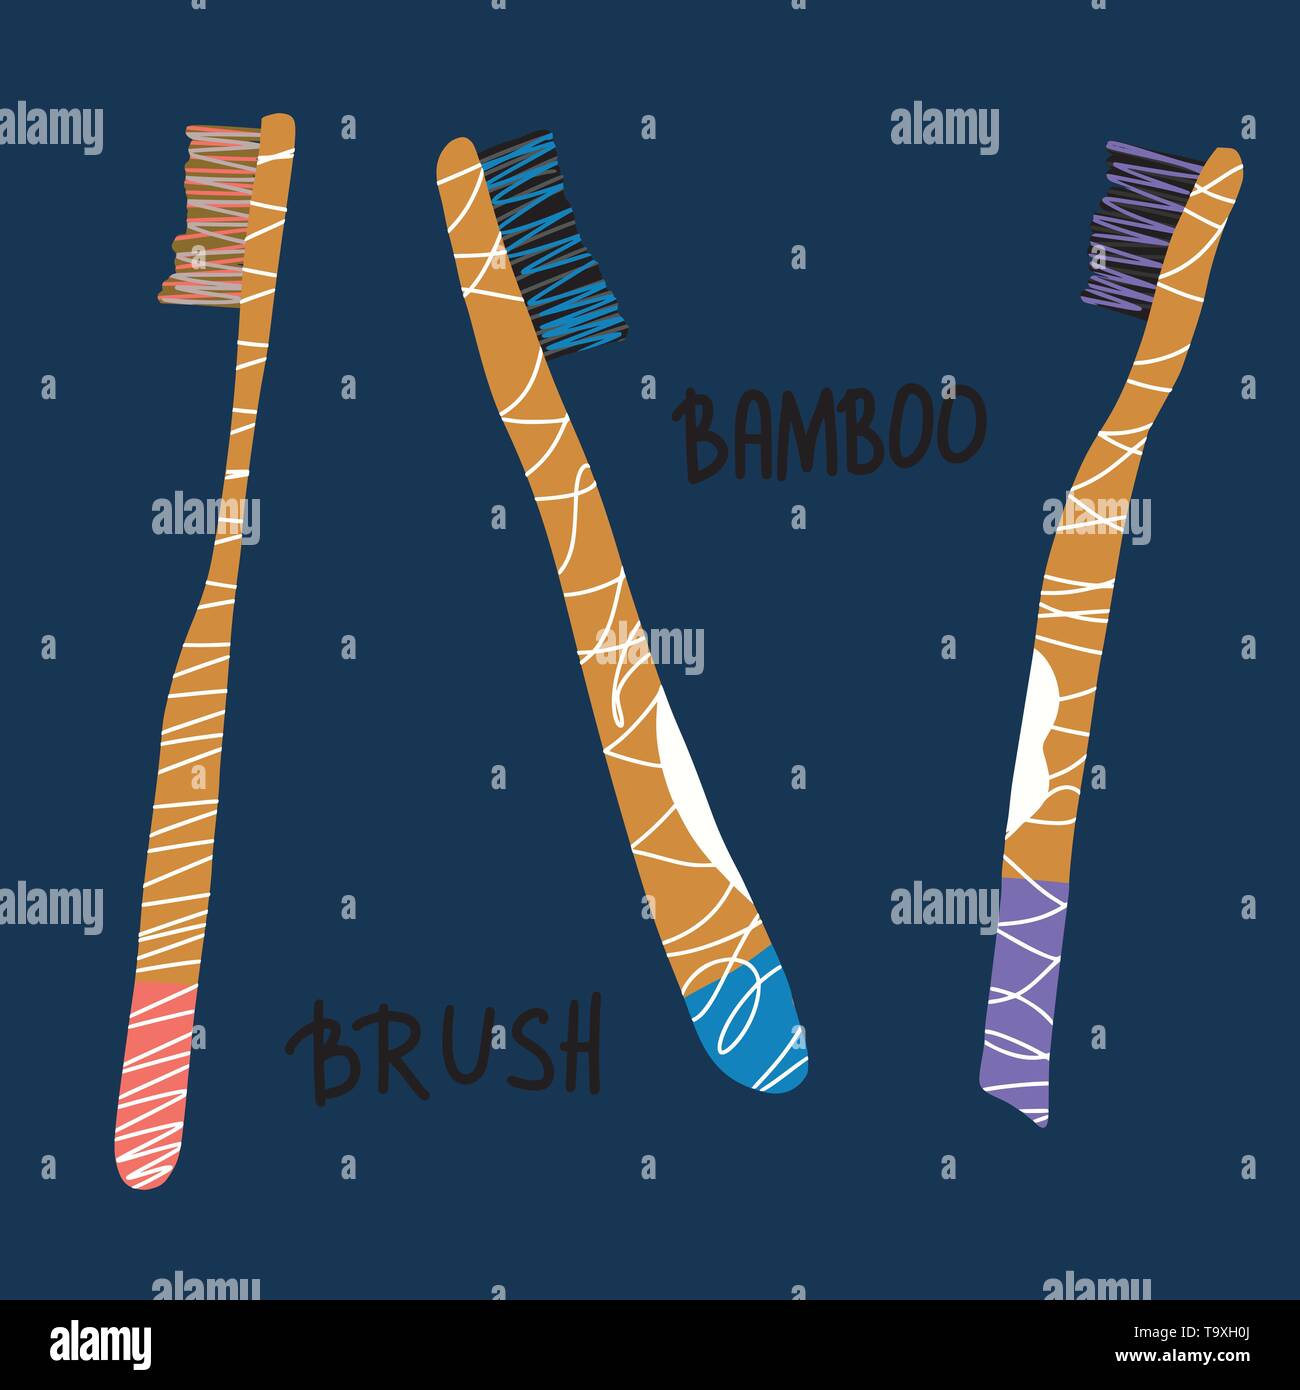 Bamboo toothbrushes set isolated. Zero waste tips. Eco-friendly brushes with text. Vector illustration. Stock Vector